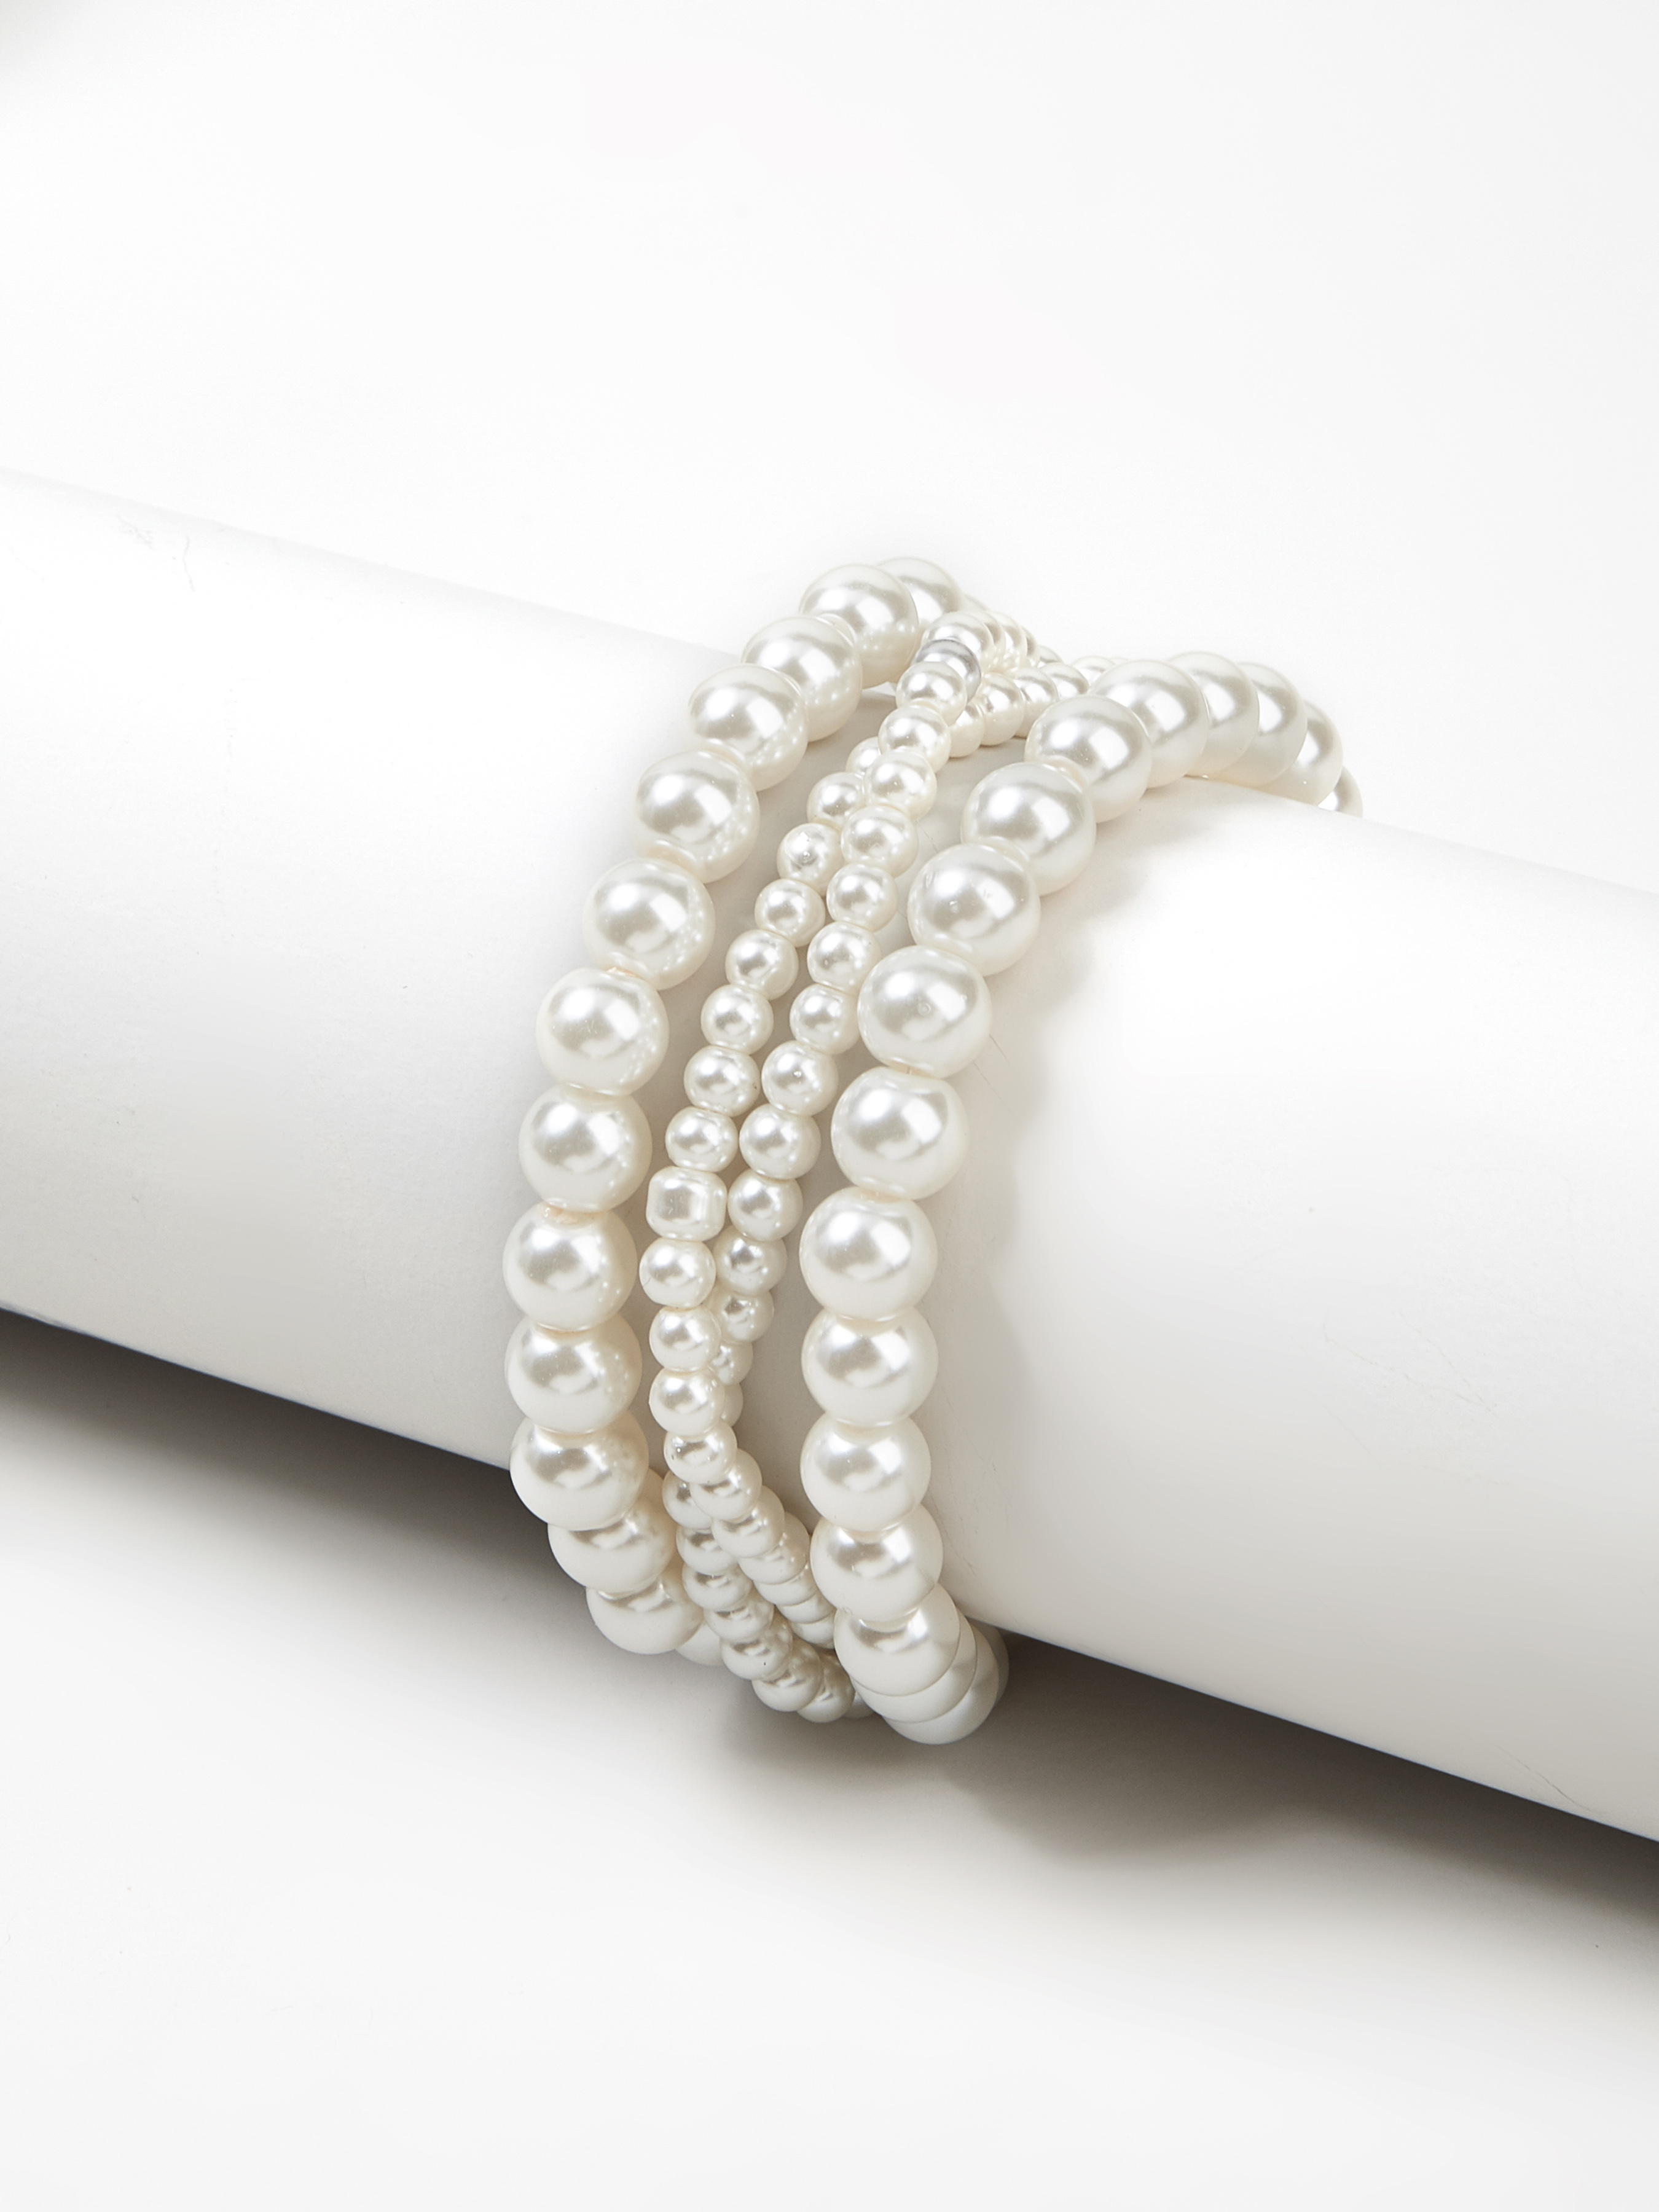 Multi-Strand Faux Pearl Bracelet, White, One Size, Wearable Costume  Accessory for Halloween | Party City